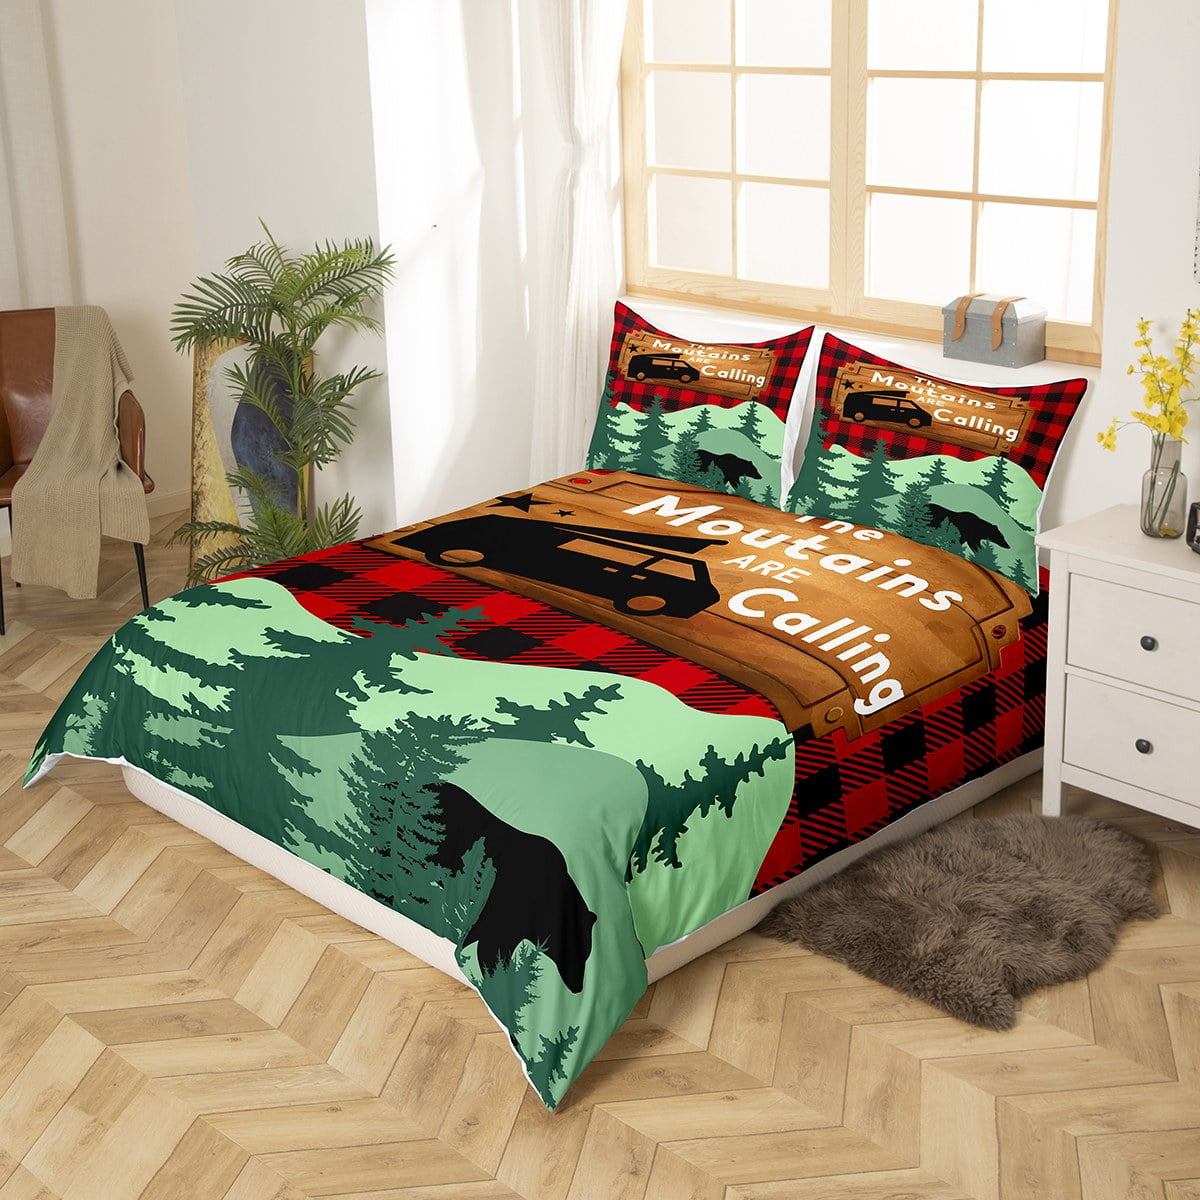 Rustic Deer Duvet Cover Full,Hunting Animal Deer Antlers Sketch Bedding Set  for Kids Boys Girls,Army Camo Art Comforter Cover,Farmhouse Natural  Wildlife Bed Sets with 2 Pillowcases Bedroom Decor 